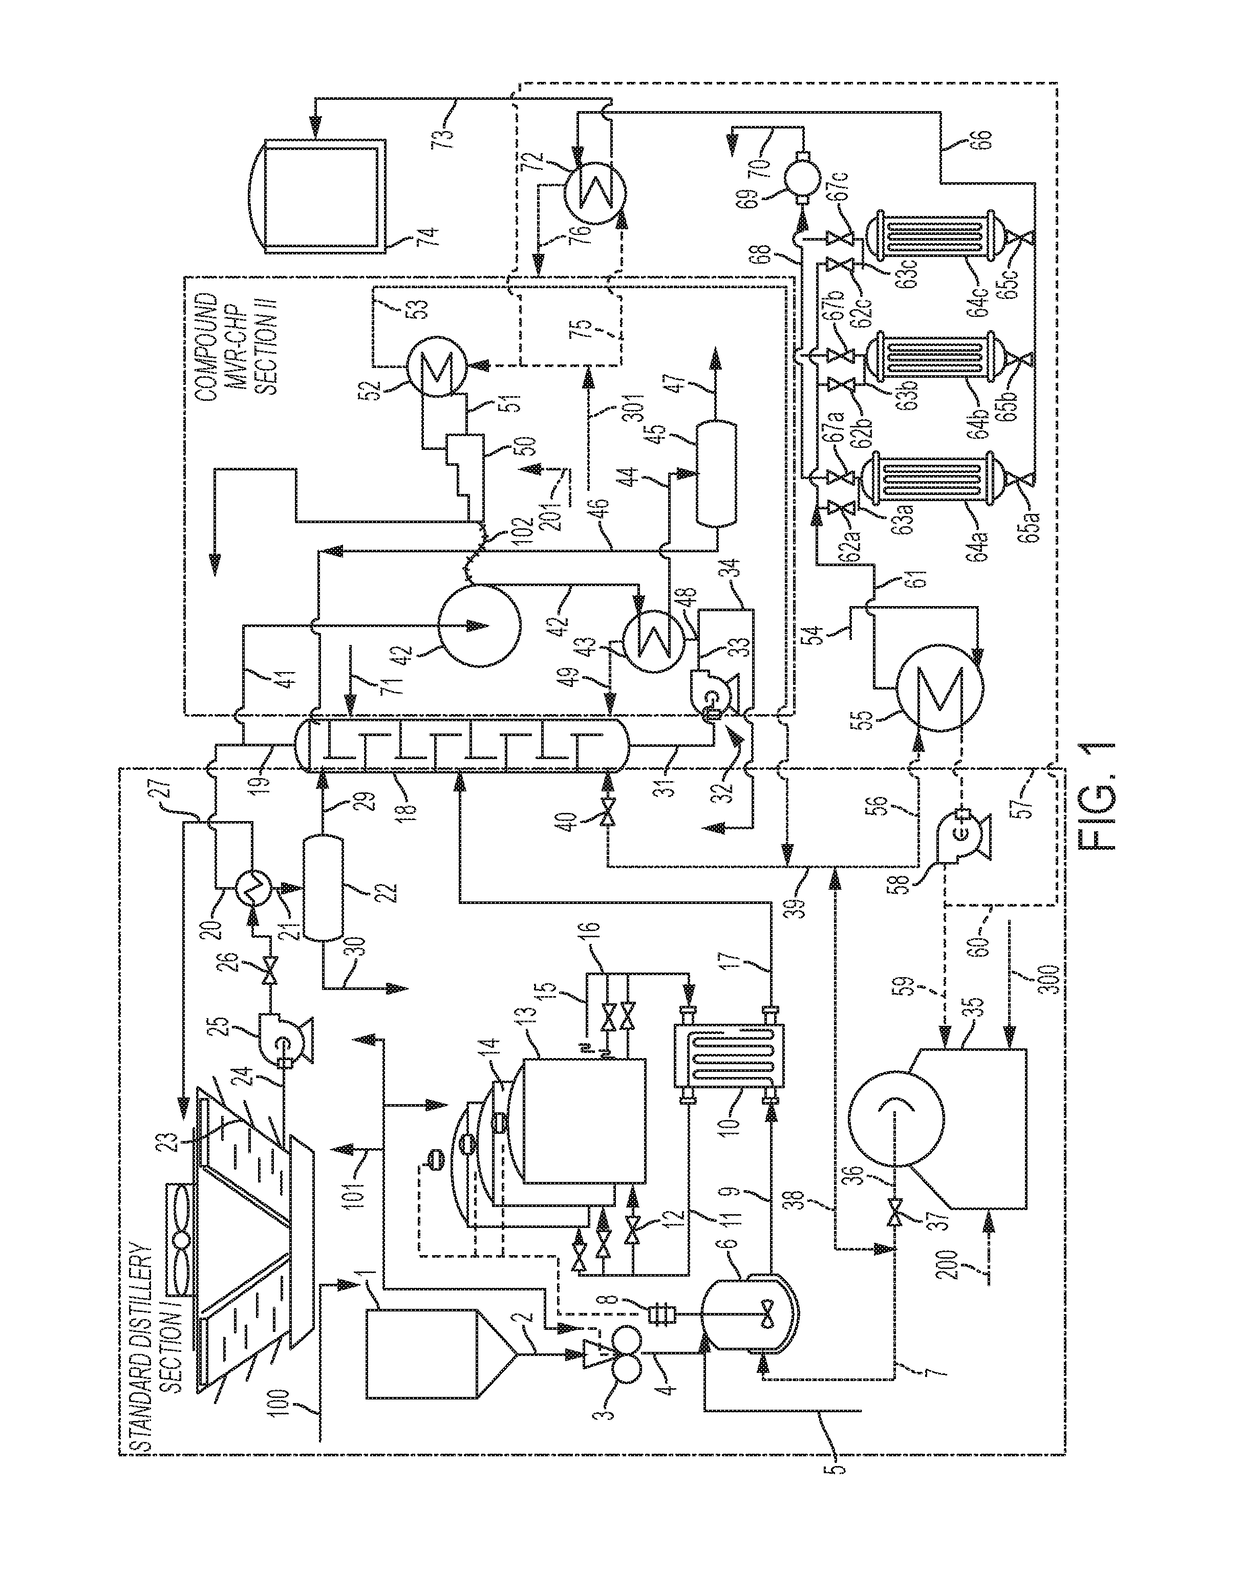 Energy-efficient systems including combined heat and power and mechanical vapor compression for biofuel or biochemical plants